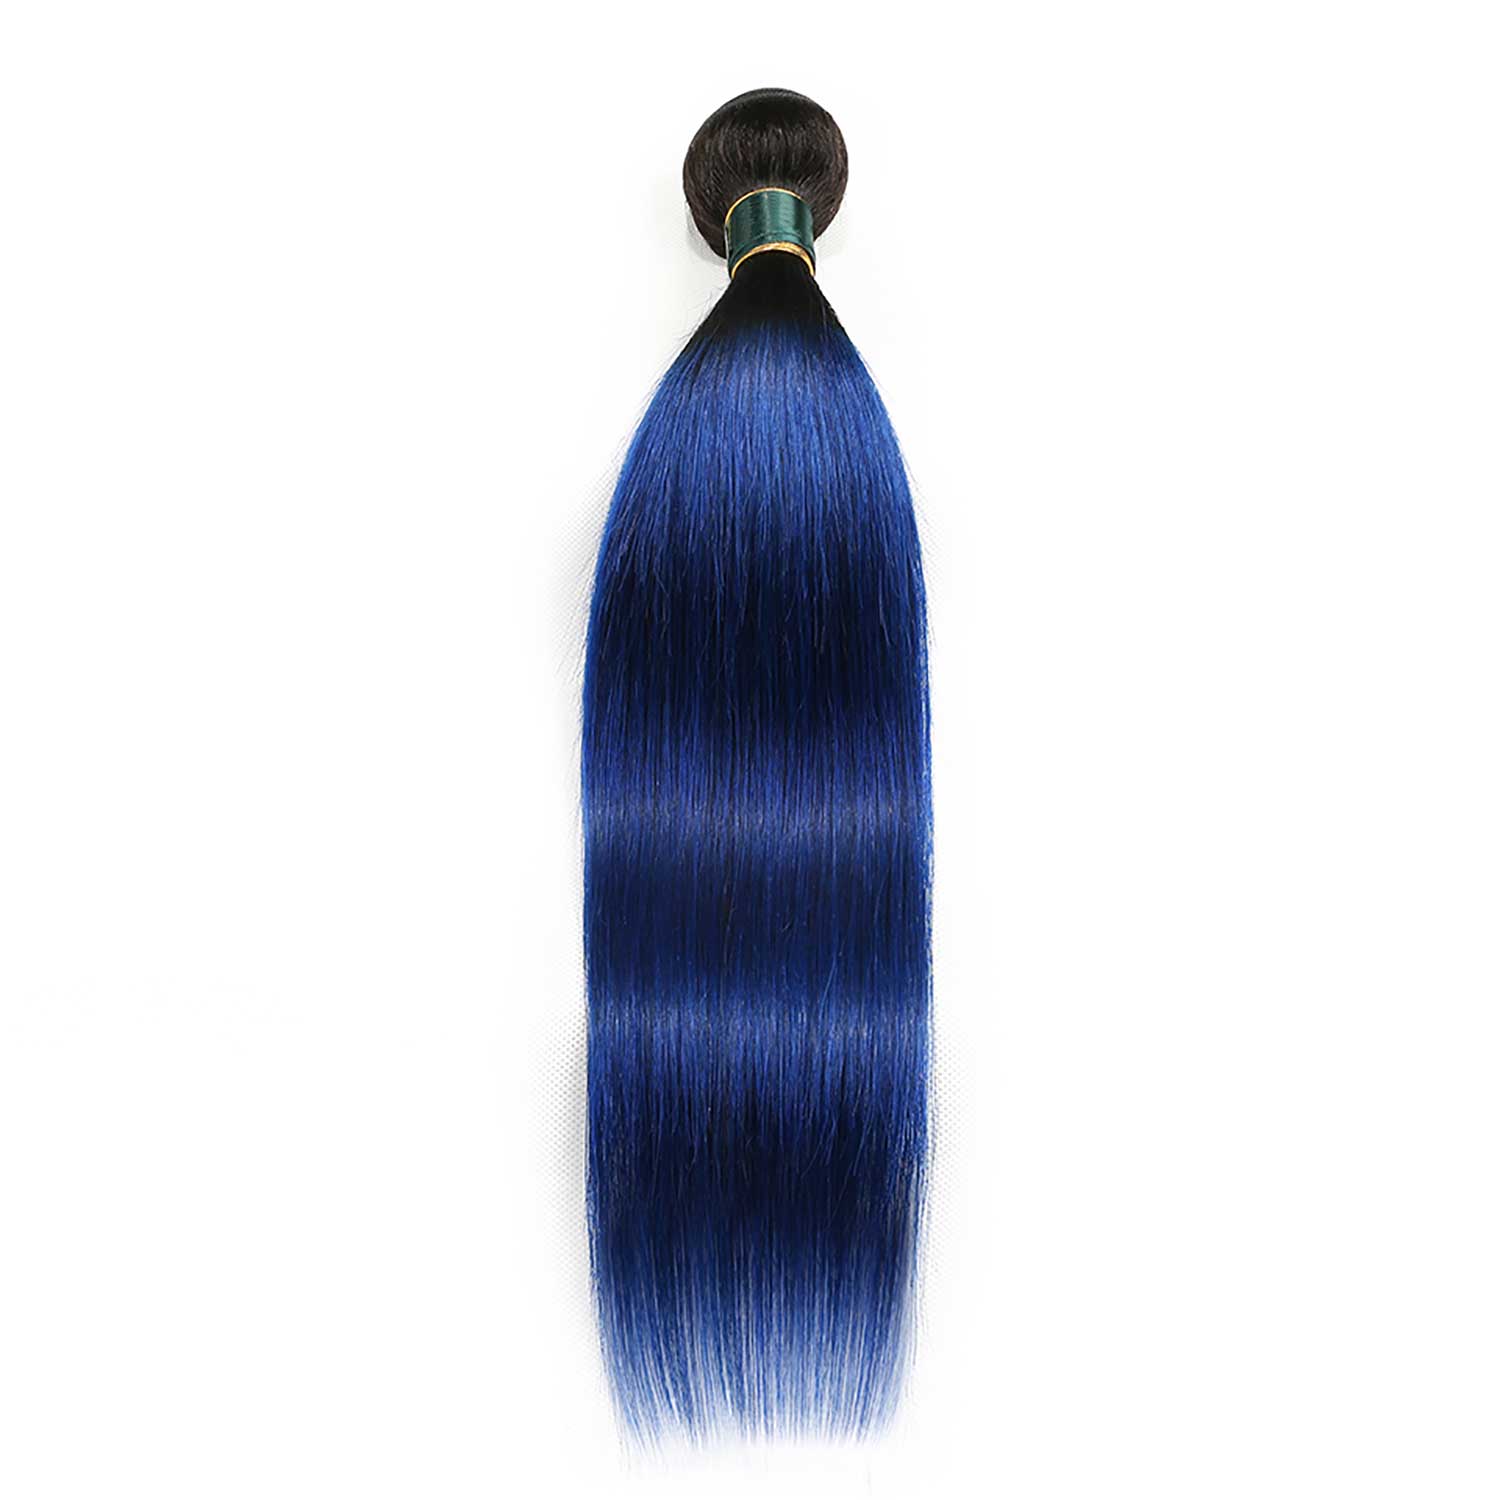 Ombre Blue Human Hair Weave Bundles with Dark Roots 1pc Only